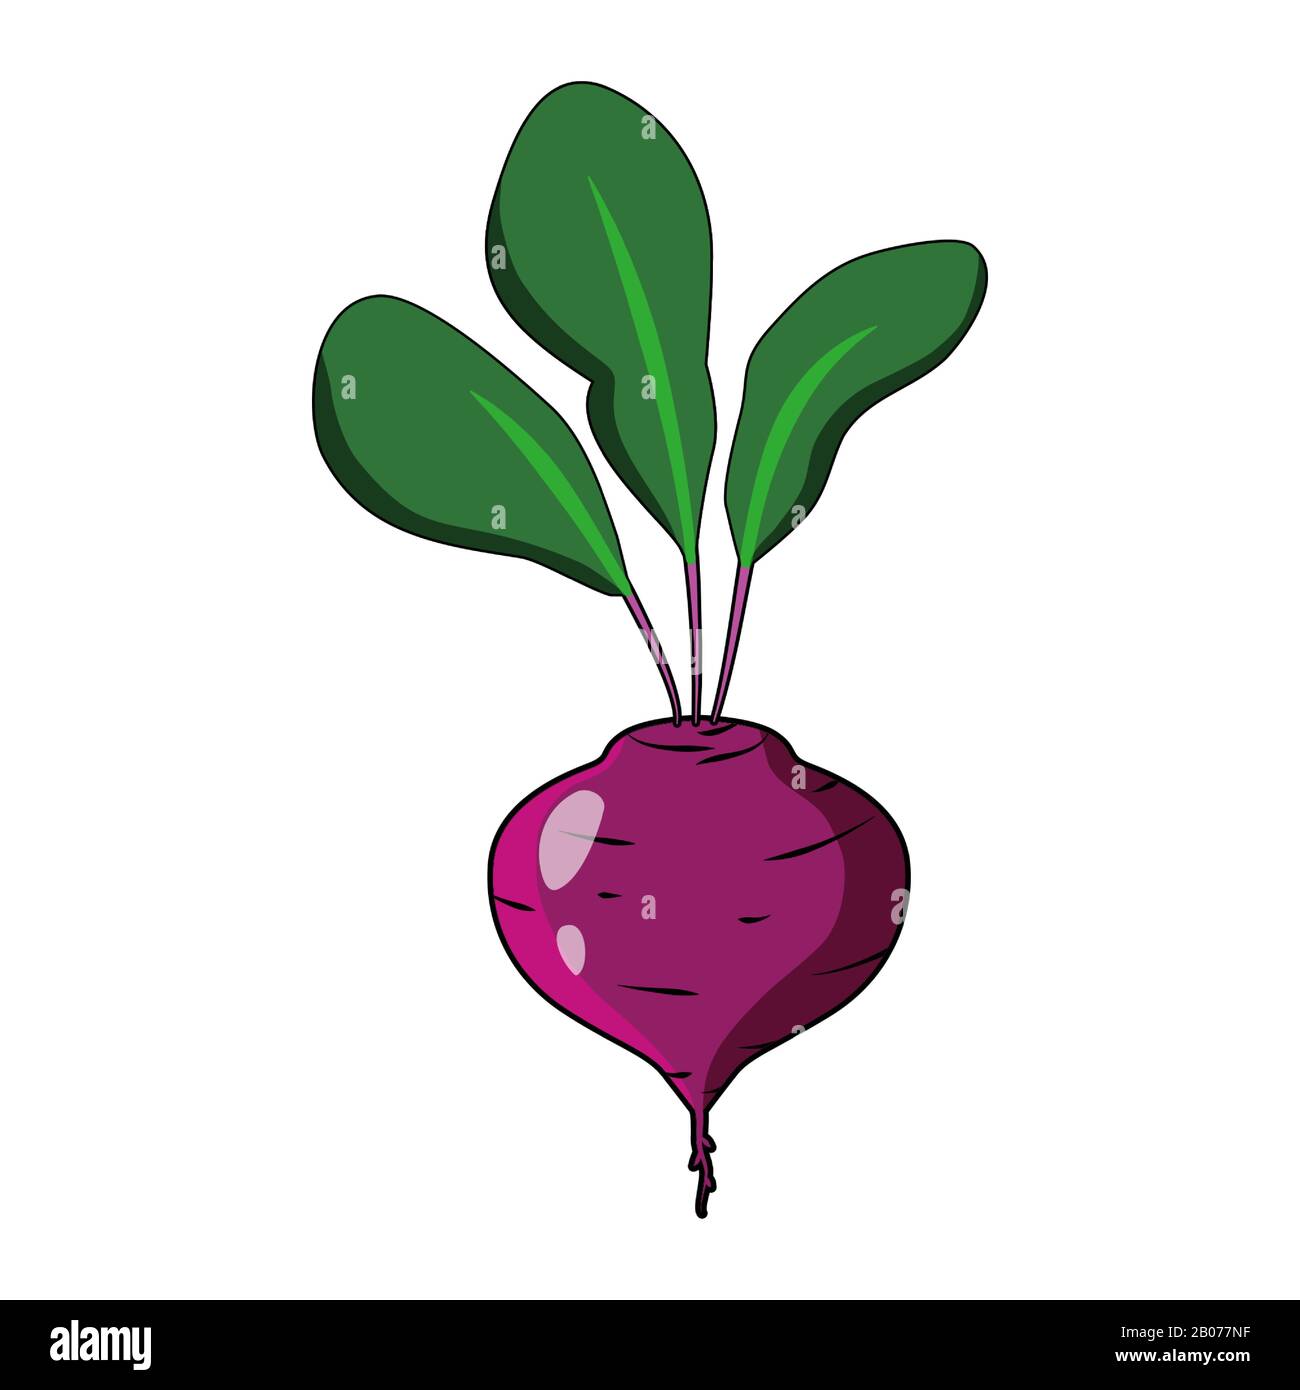 Beet with leaves Vector illustration. Red Beet flat style logo icon Stock Vector